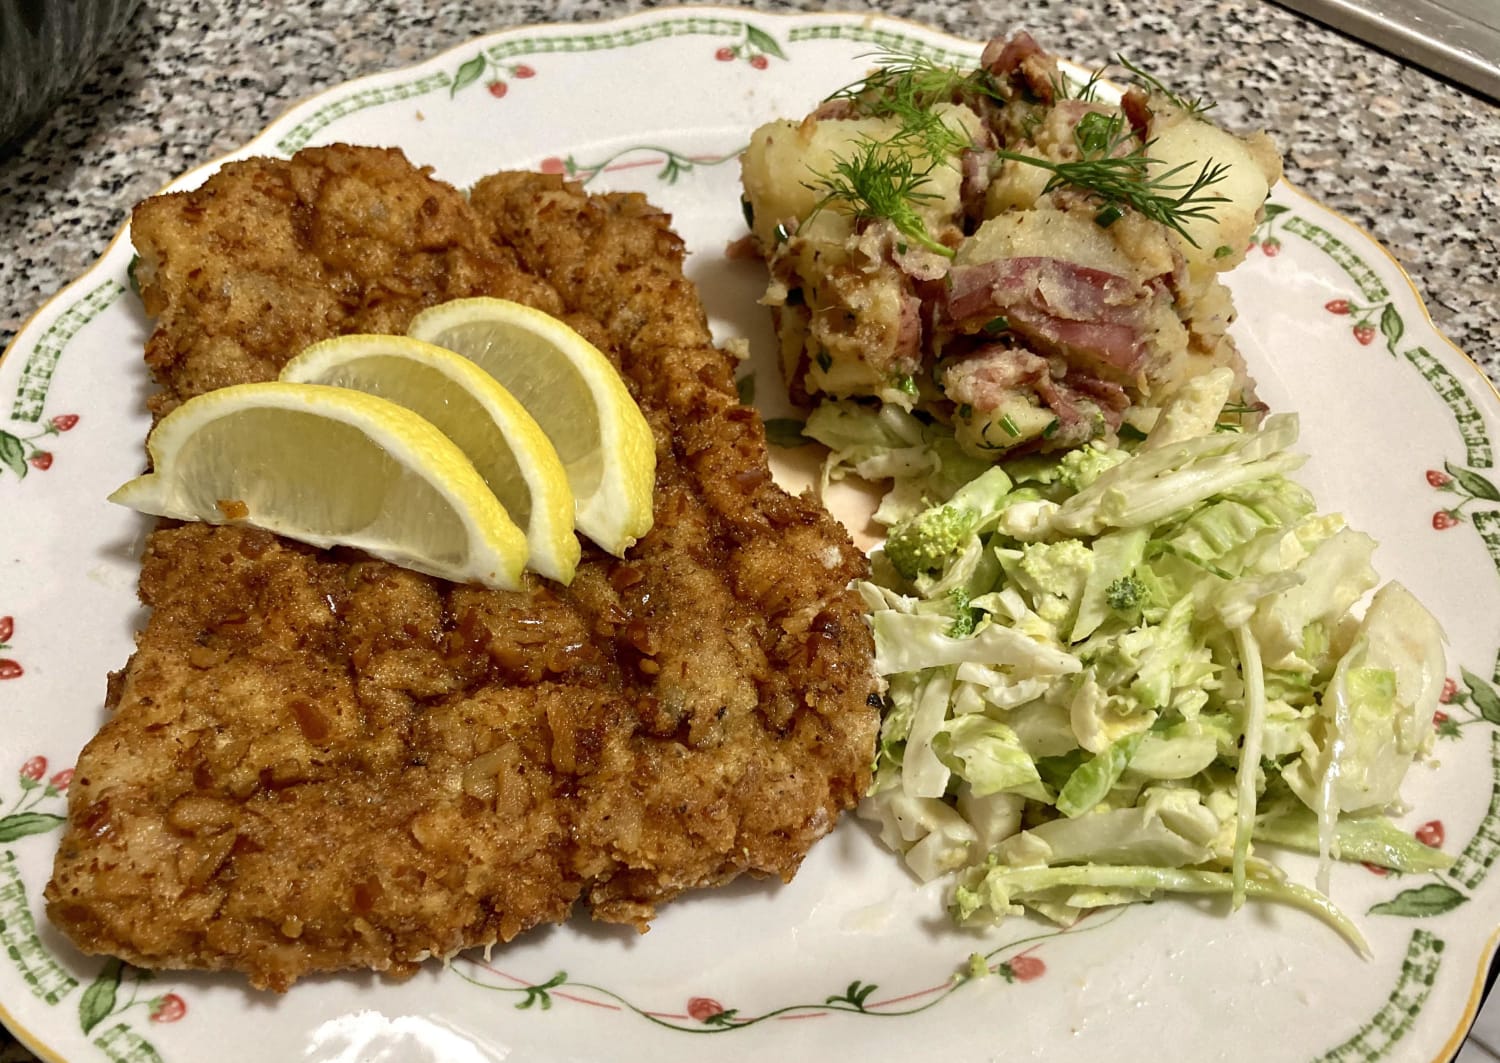 [Homemade] Pretzel crusted pork schnitzel with German potato salad and Brussels sprouts and broccoli slaw